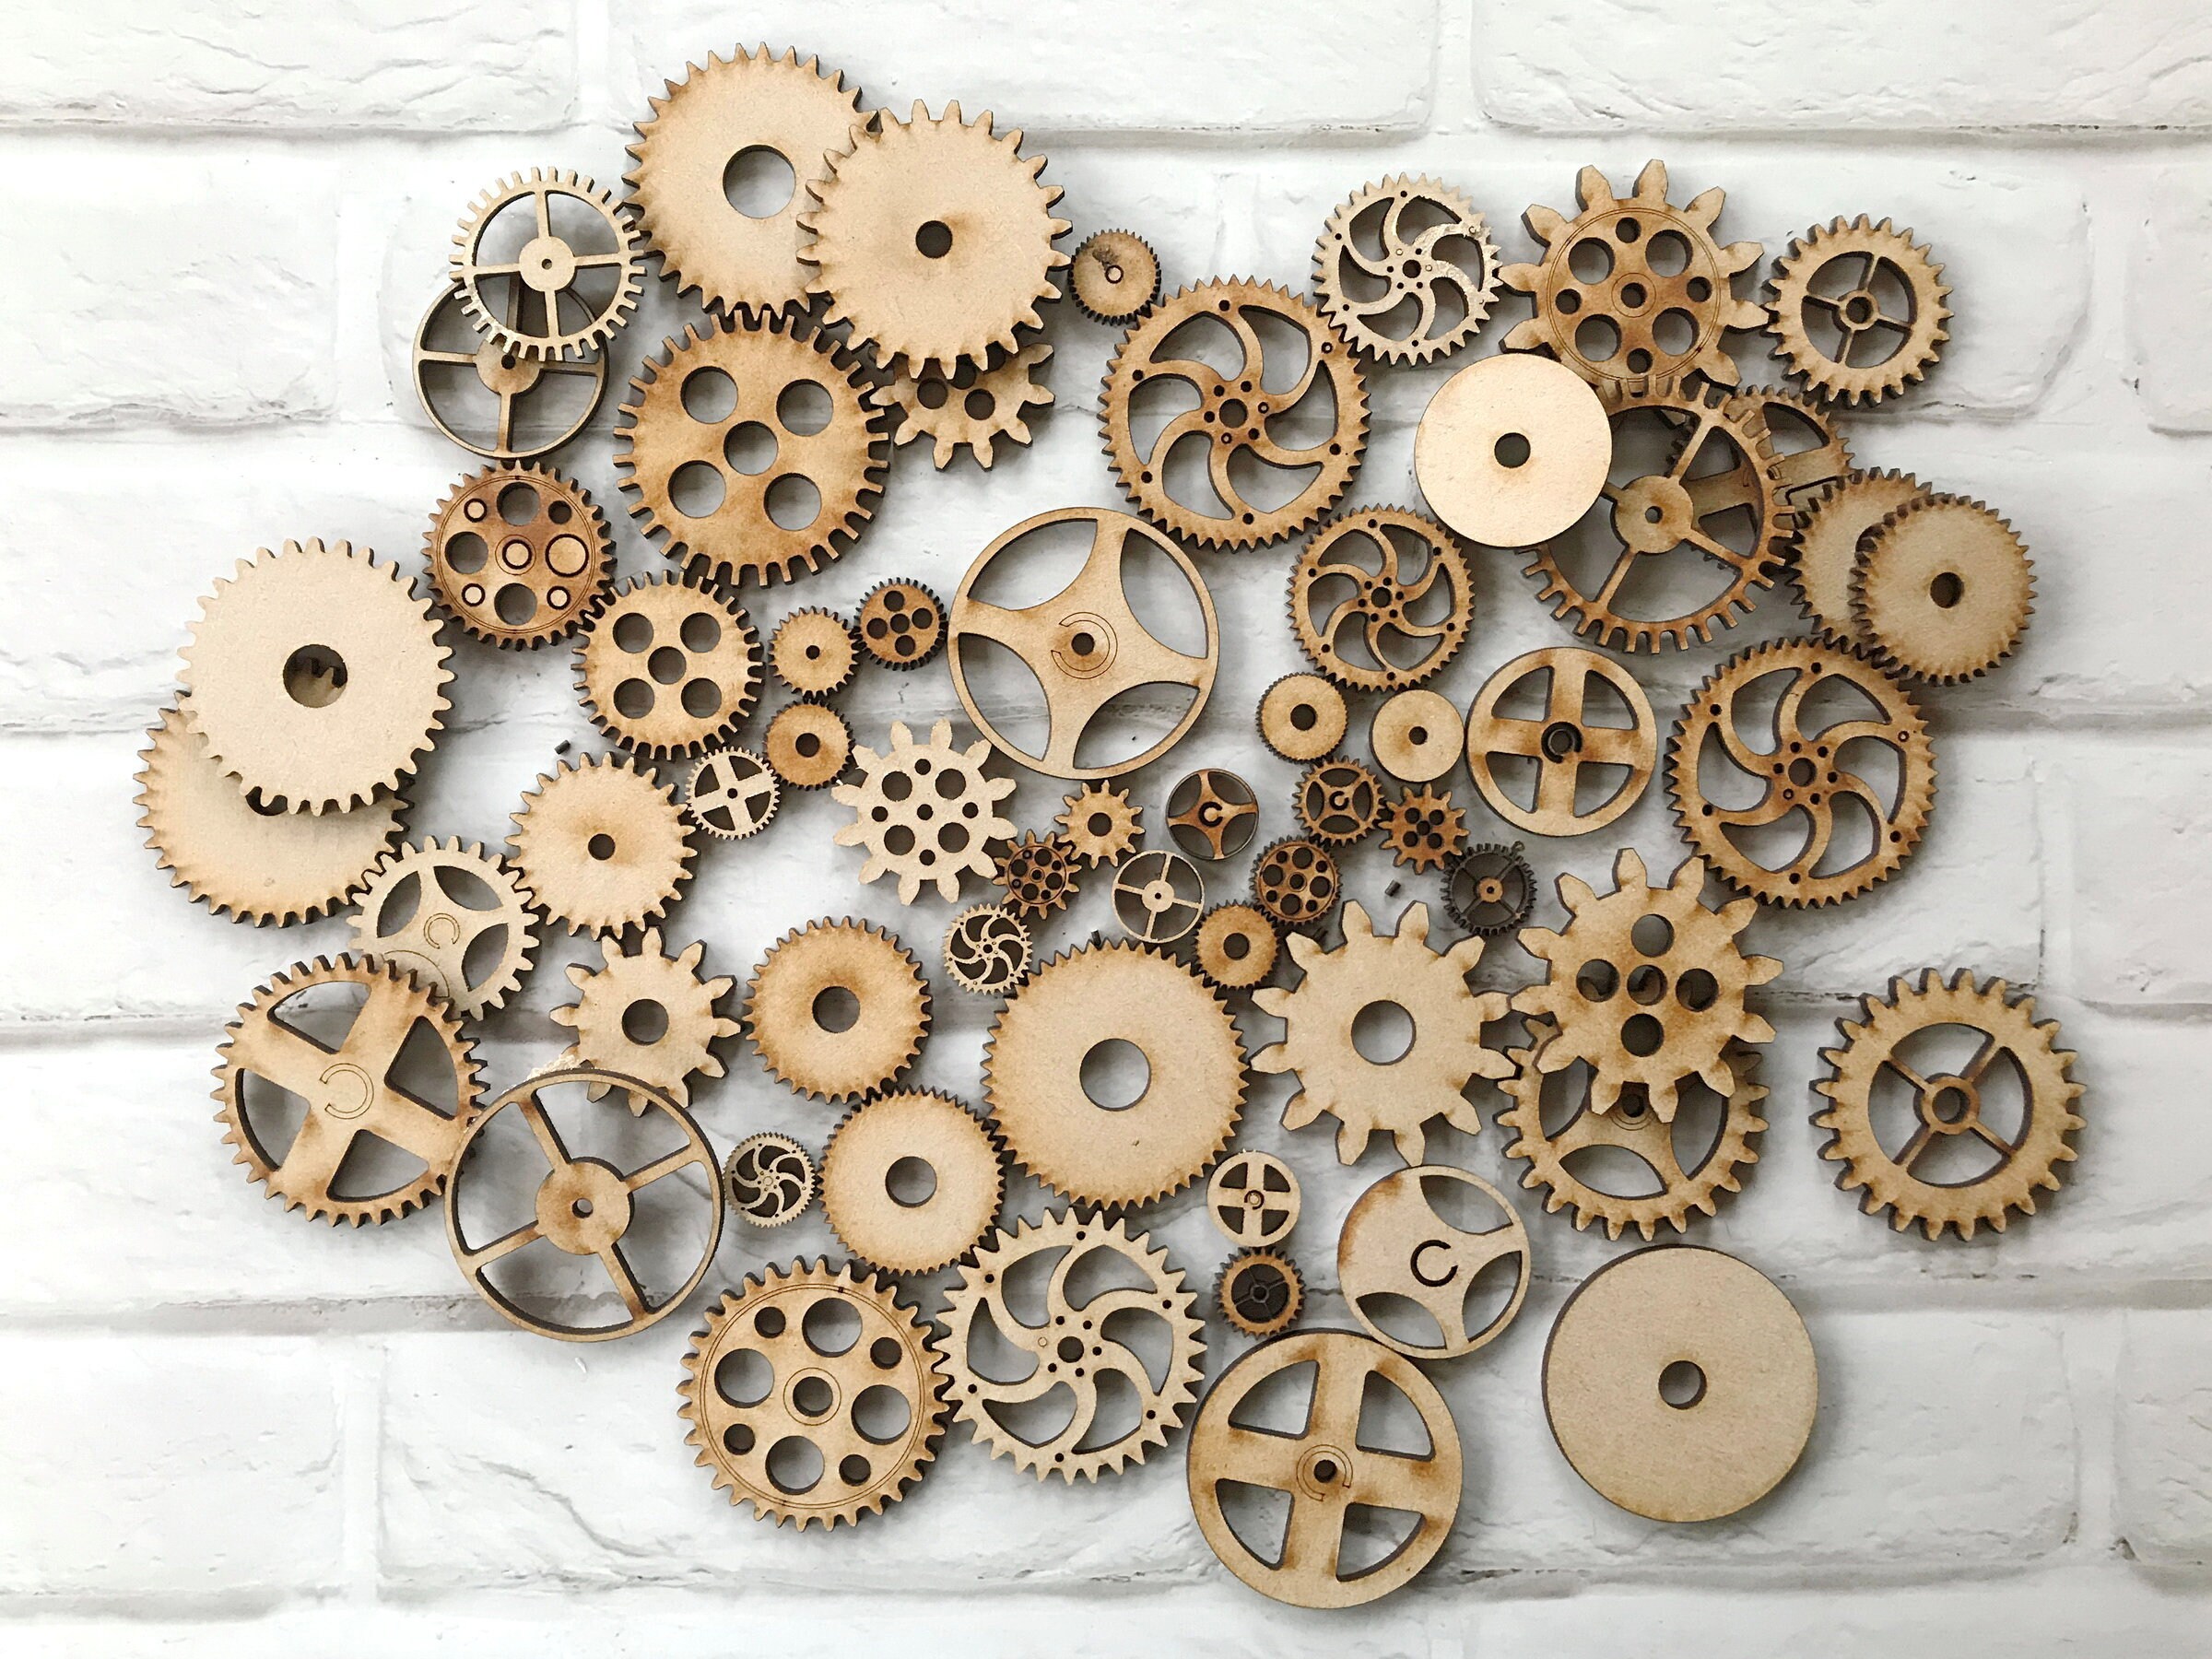  12pc. Set of Wooden Gears - Cool Industrial